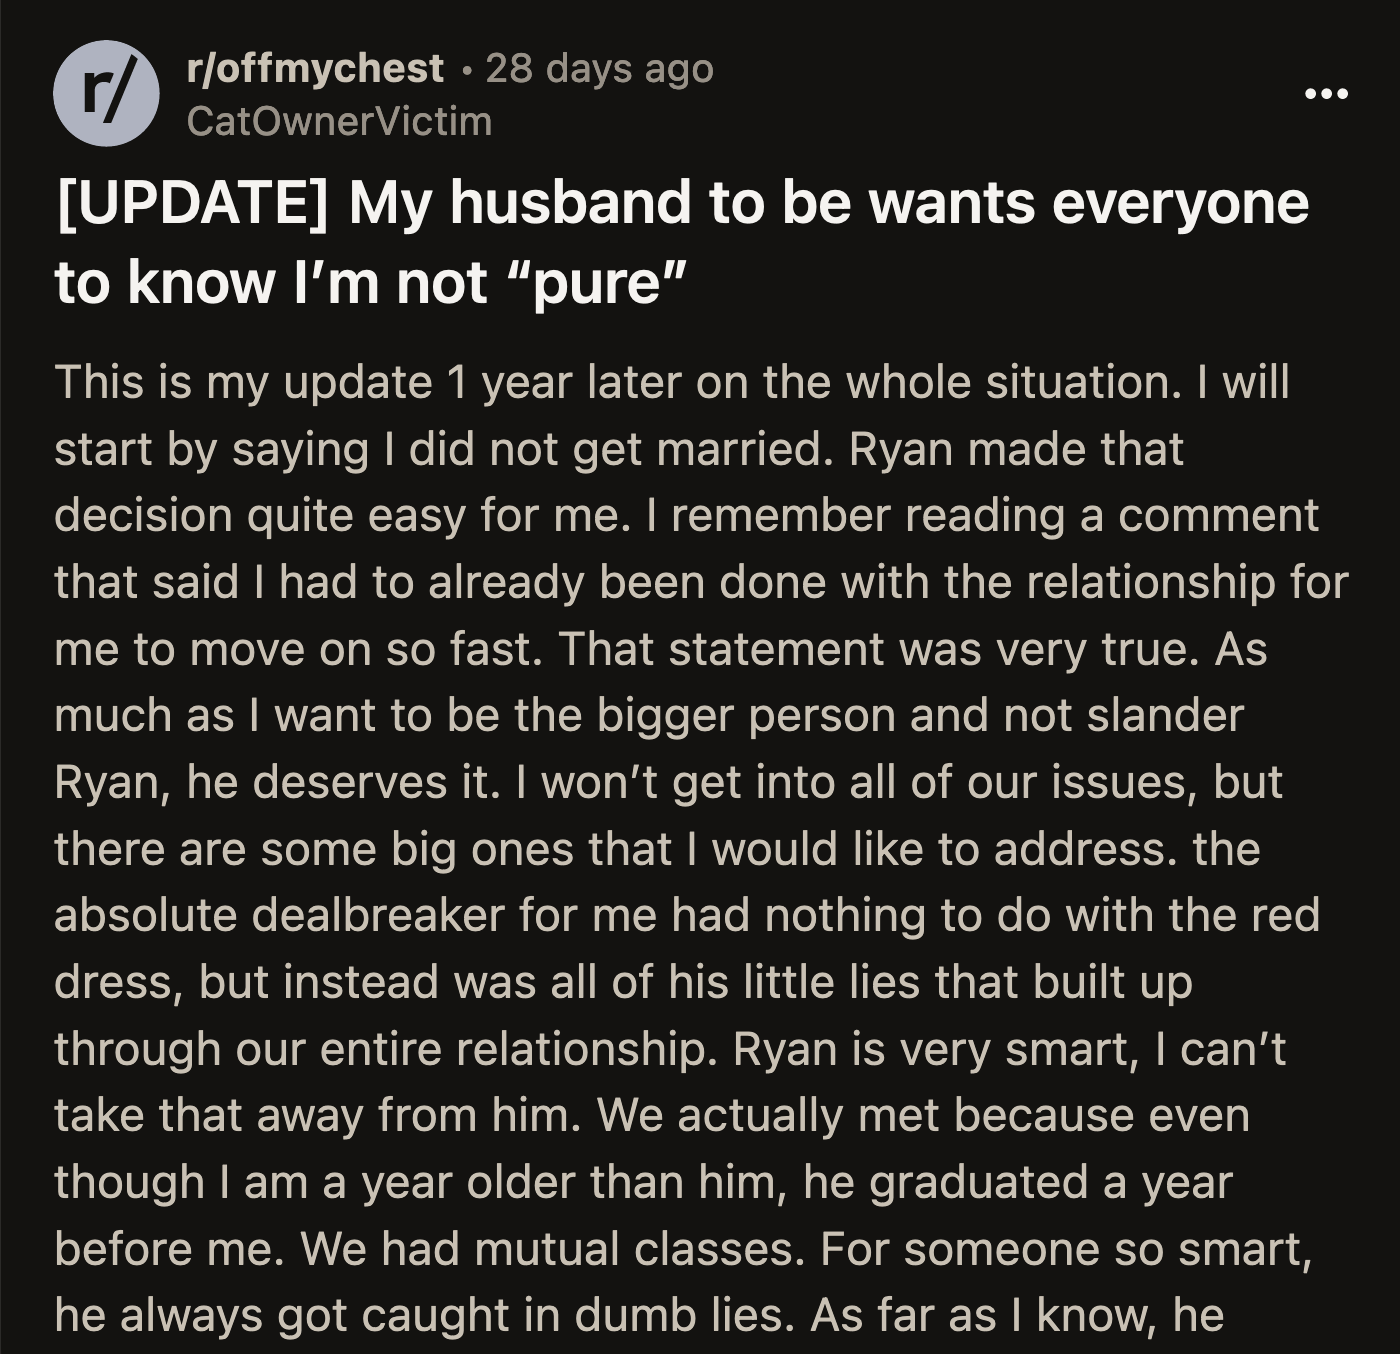 OP happily shared in an update that she didn't marry Ryan. The incident brought to light all of Ryan's little lies. OP realized she didn't trust her fiancé.